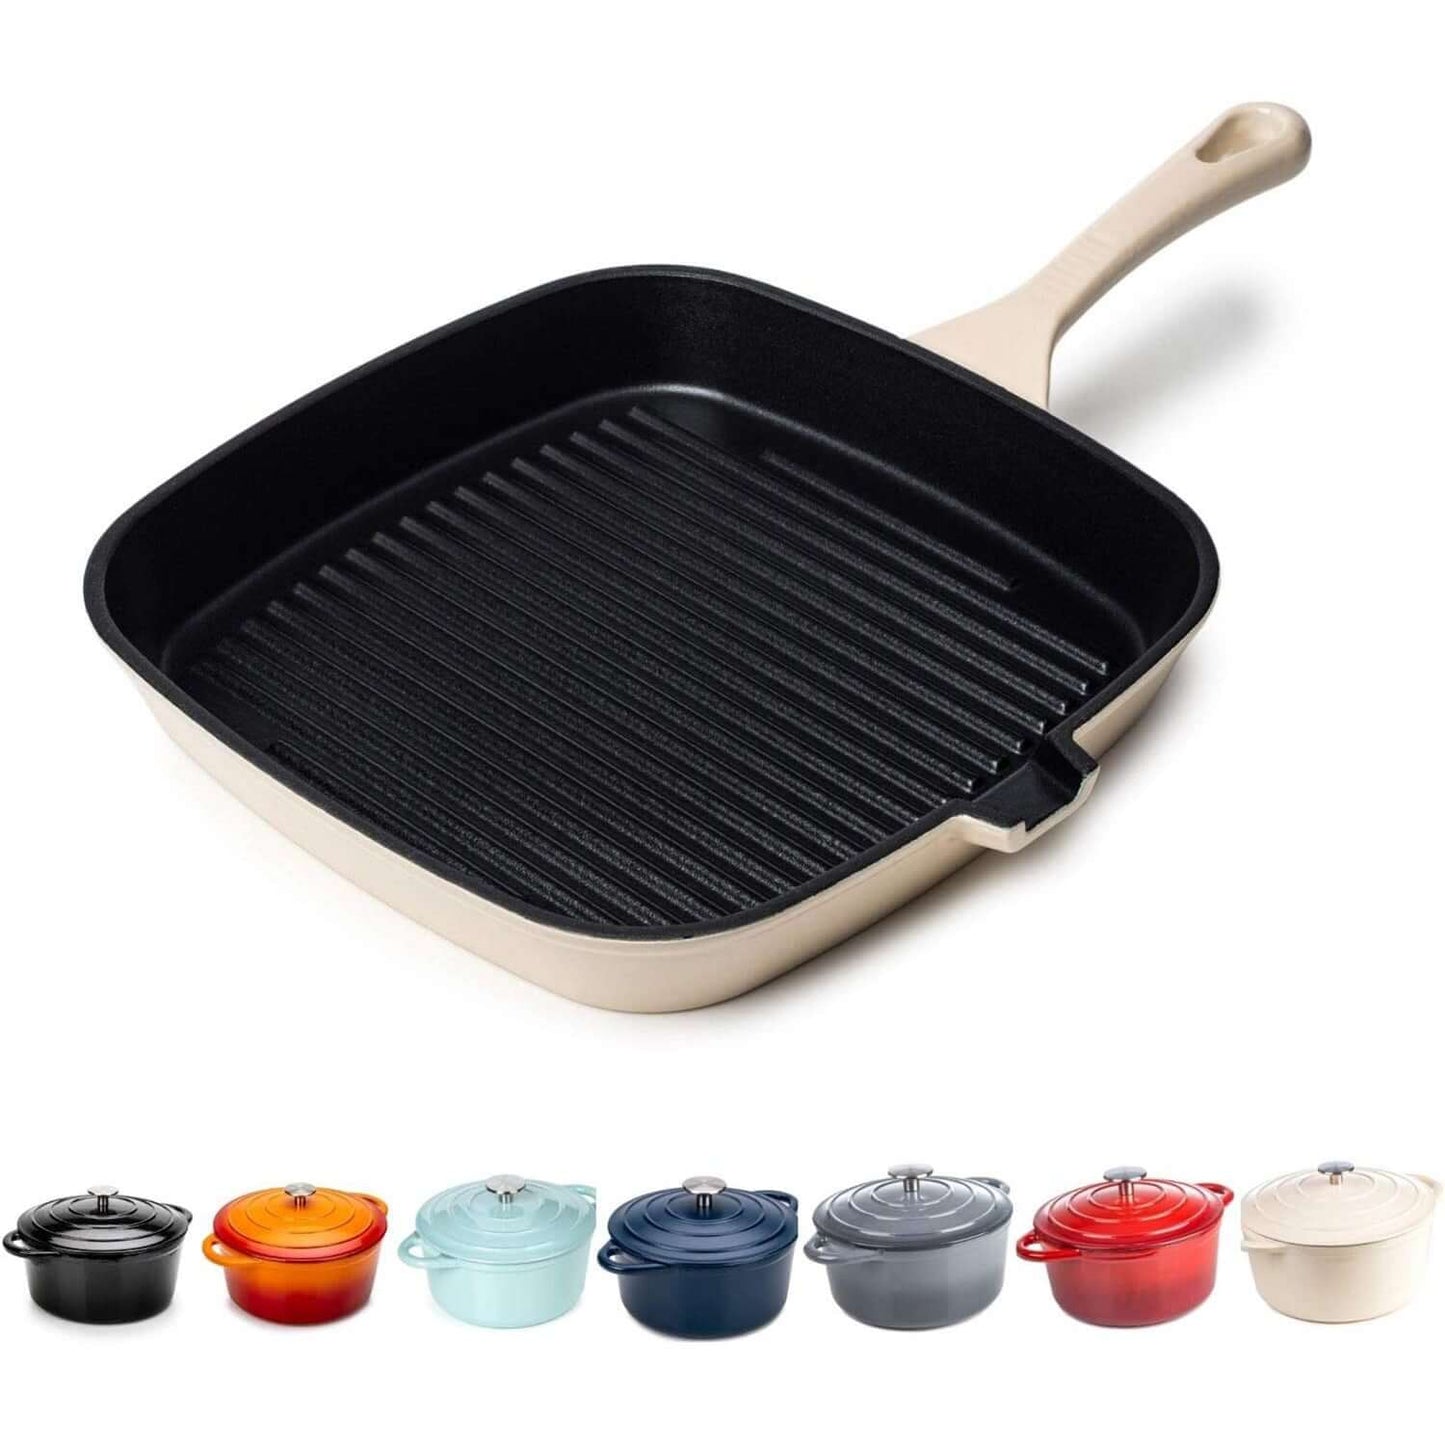 23.5cm Cream/Red/Grey Grill Griddle Pan Cast Iron Square Frying Pan Induction and Gas 10 Yr Guarantee